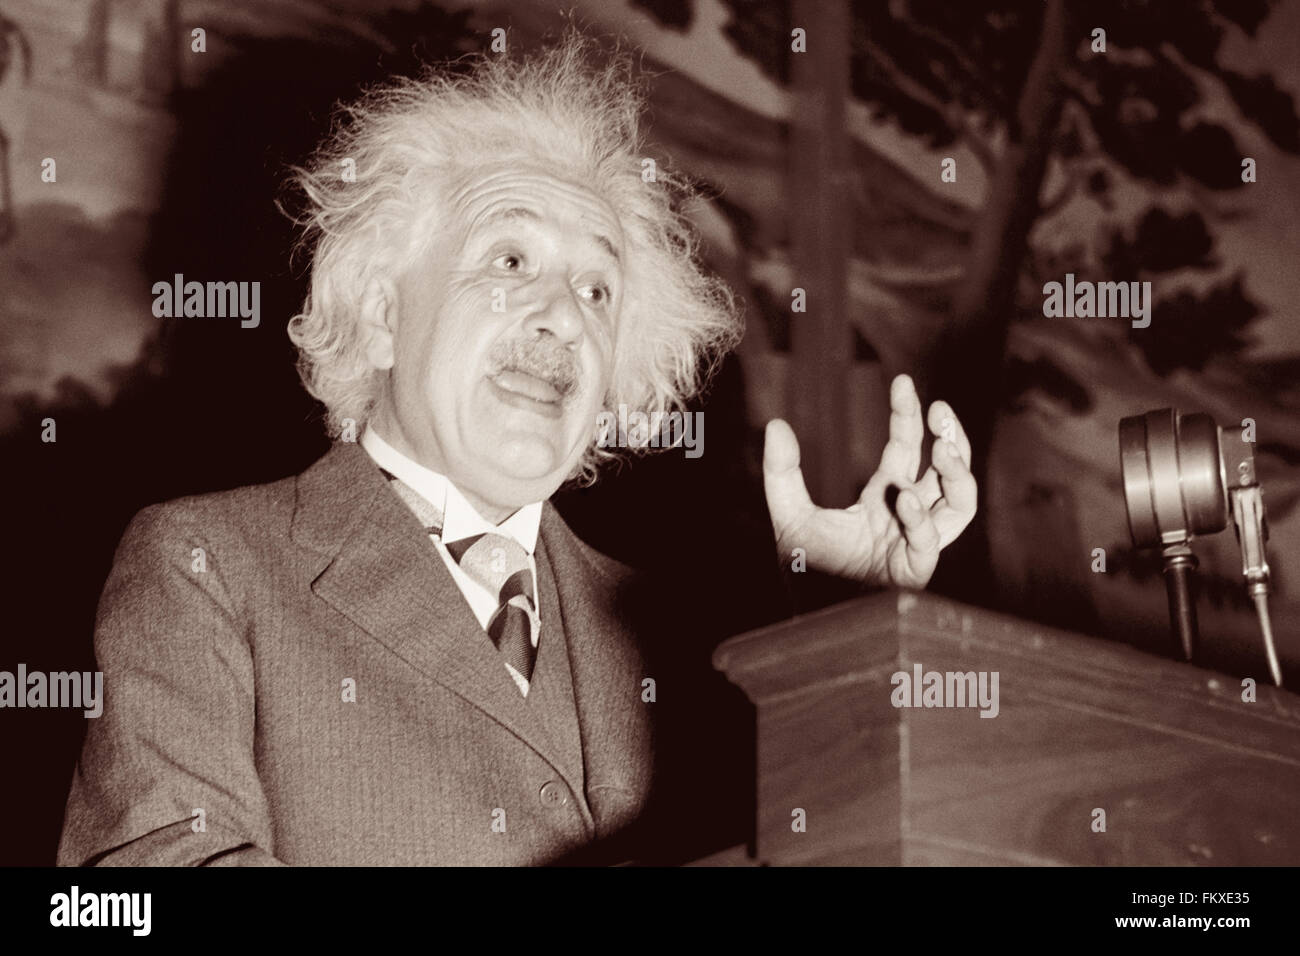 ALBERT EINSTEIN E=MC2 GERMANY THEORETICAL PHYSICIST 8X10 PICTURE PHOTO POSTER 